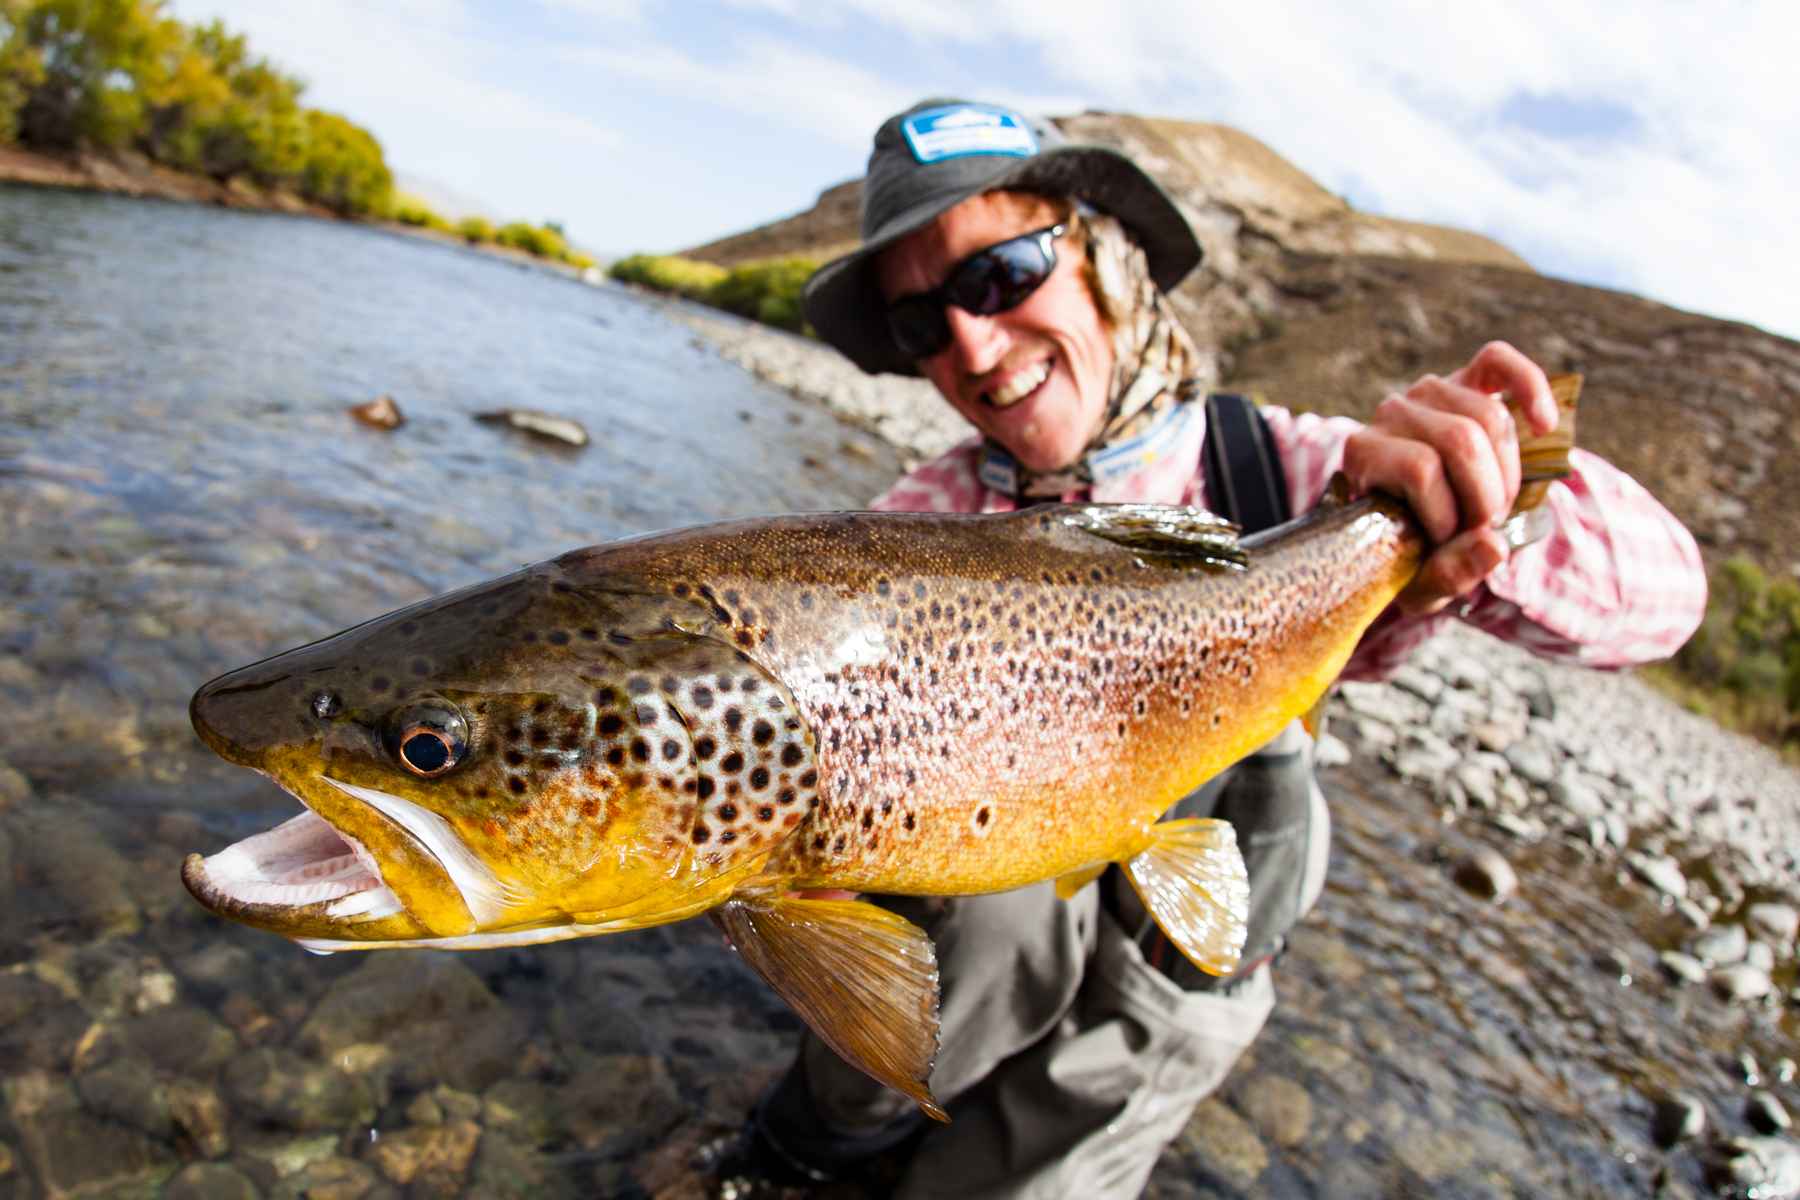 http://www.hatchmag.com/sites/default/files/styles/extra-large/public/field/image/_MG_3353.jpg